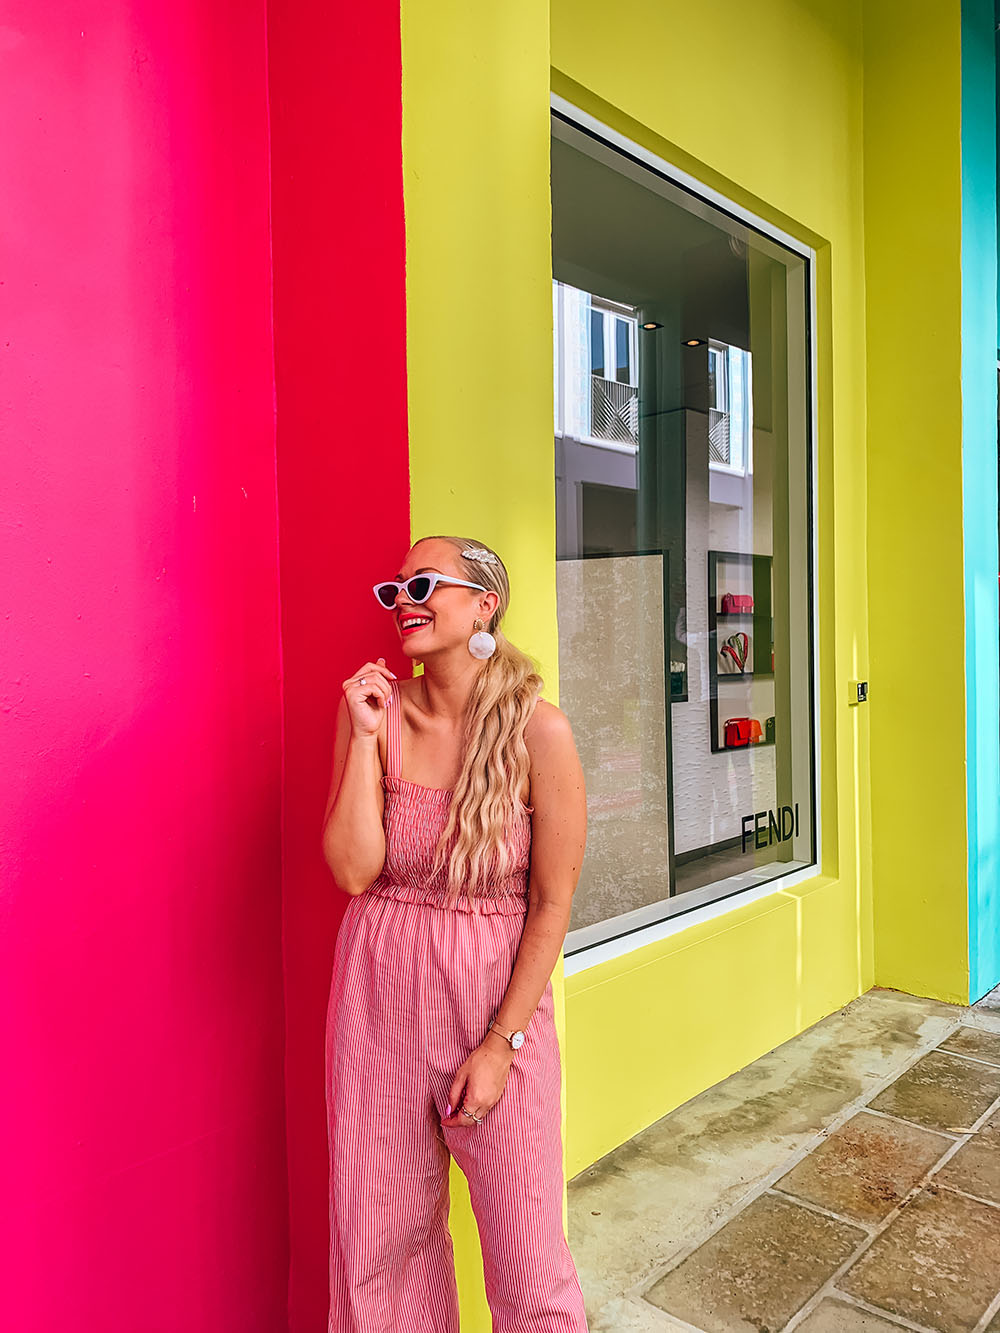 So you've planned a wonderful 3 day trip to Miami and now you're looking for the perfect itinerary for your visit… well, this guide is for you! I’ve put together the ultimate 3 days in Miami itinerary that will have you seeing and experiencing all of Miami’s top sights and attractions. From South Beach & Ocean Drive to Little Havana & Wynwood, you don’t want to miss this guide to the perfect long weekend in Miami. Pictured here: Explore Miami's Design District